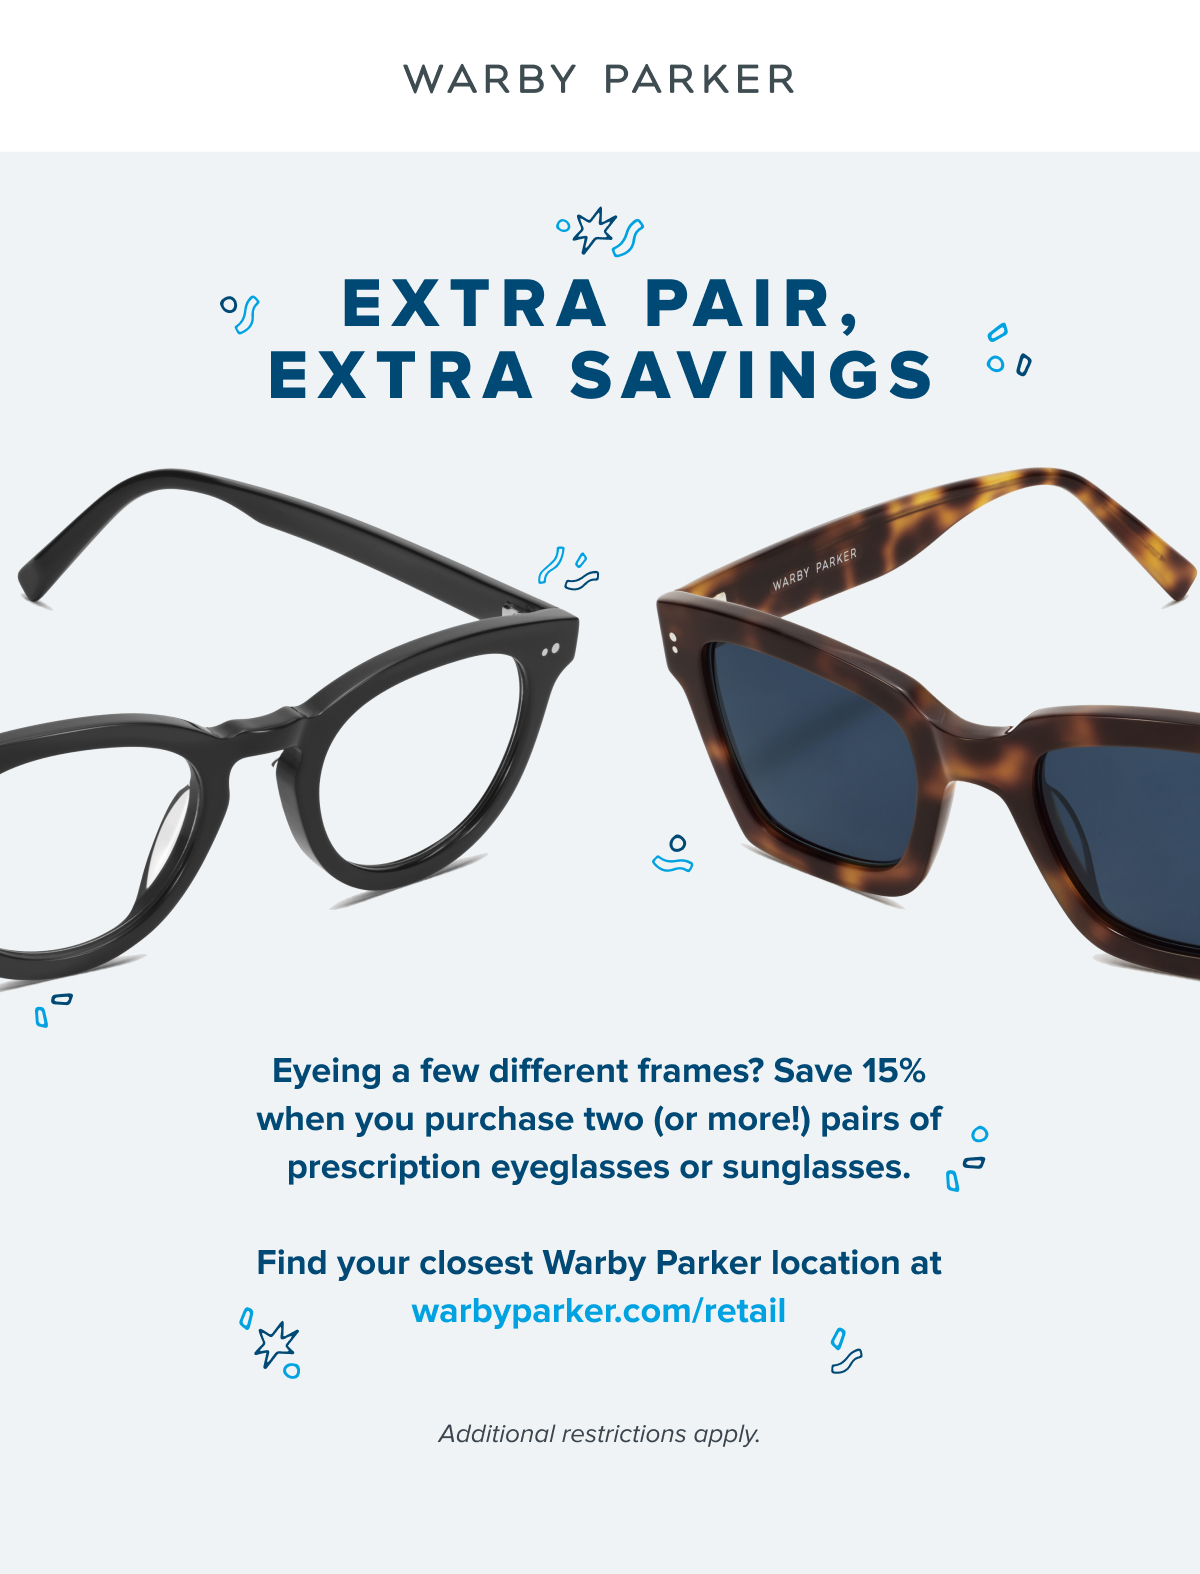 eyeing a few different frames? save 15% when you purchase two (or more!) pairs of prescription eyeglasses or sunglasses. 
find your closest Warby Parker location at warbyparker.com/retail
additional restrictions apply